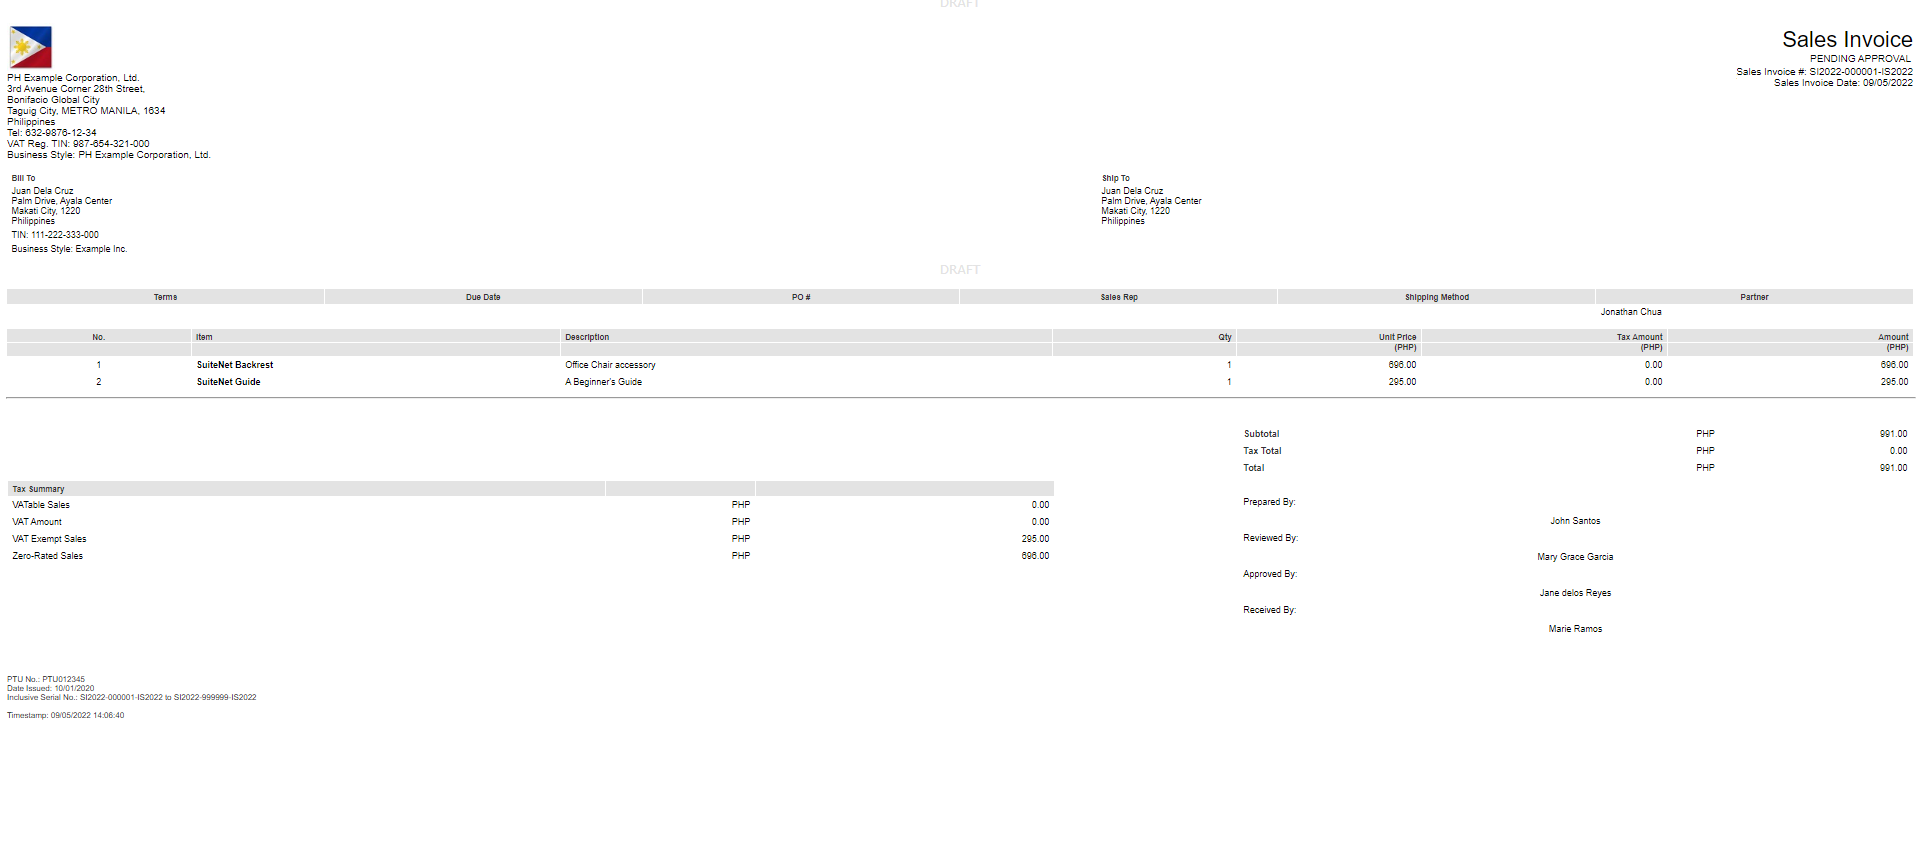 An example of a draft Philippines sales invoice in HTML.